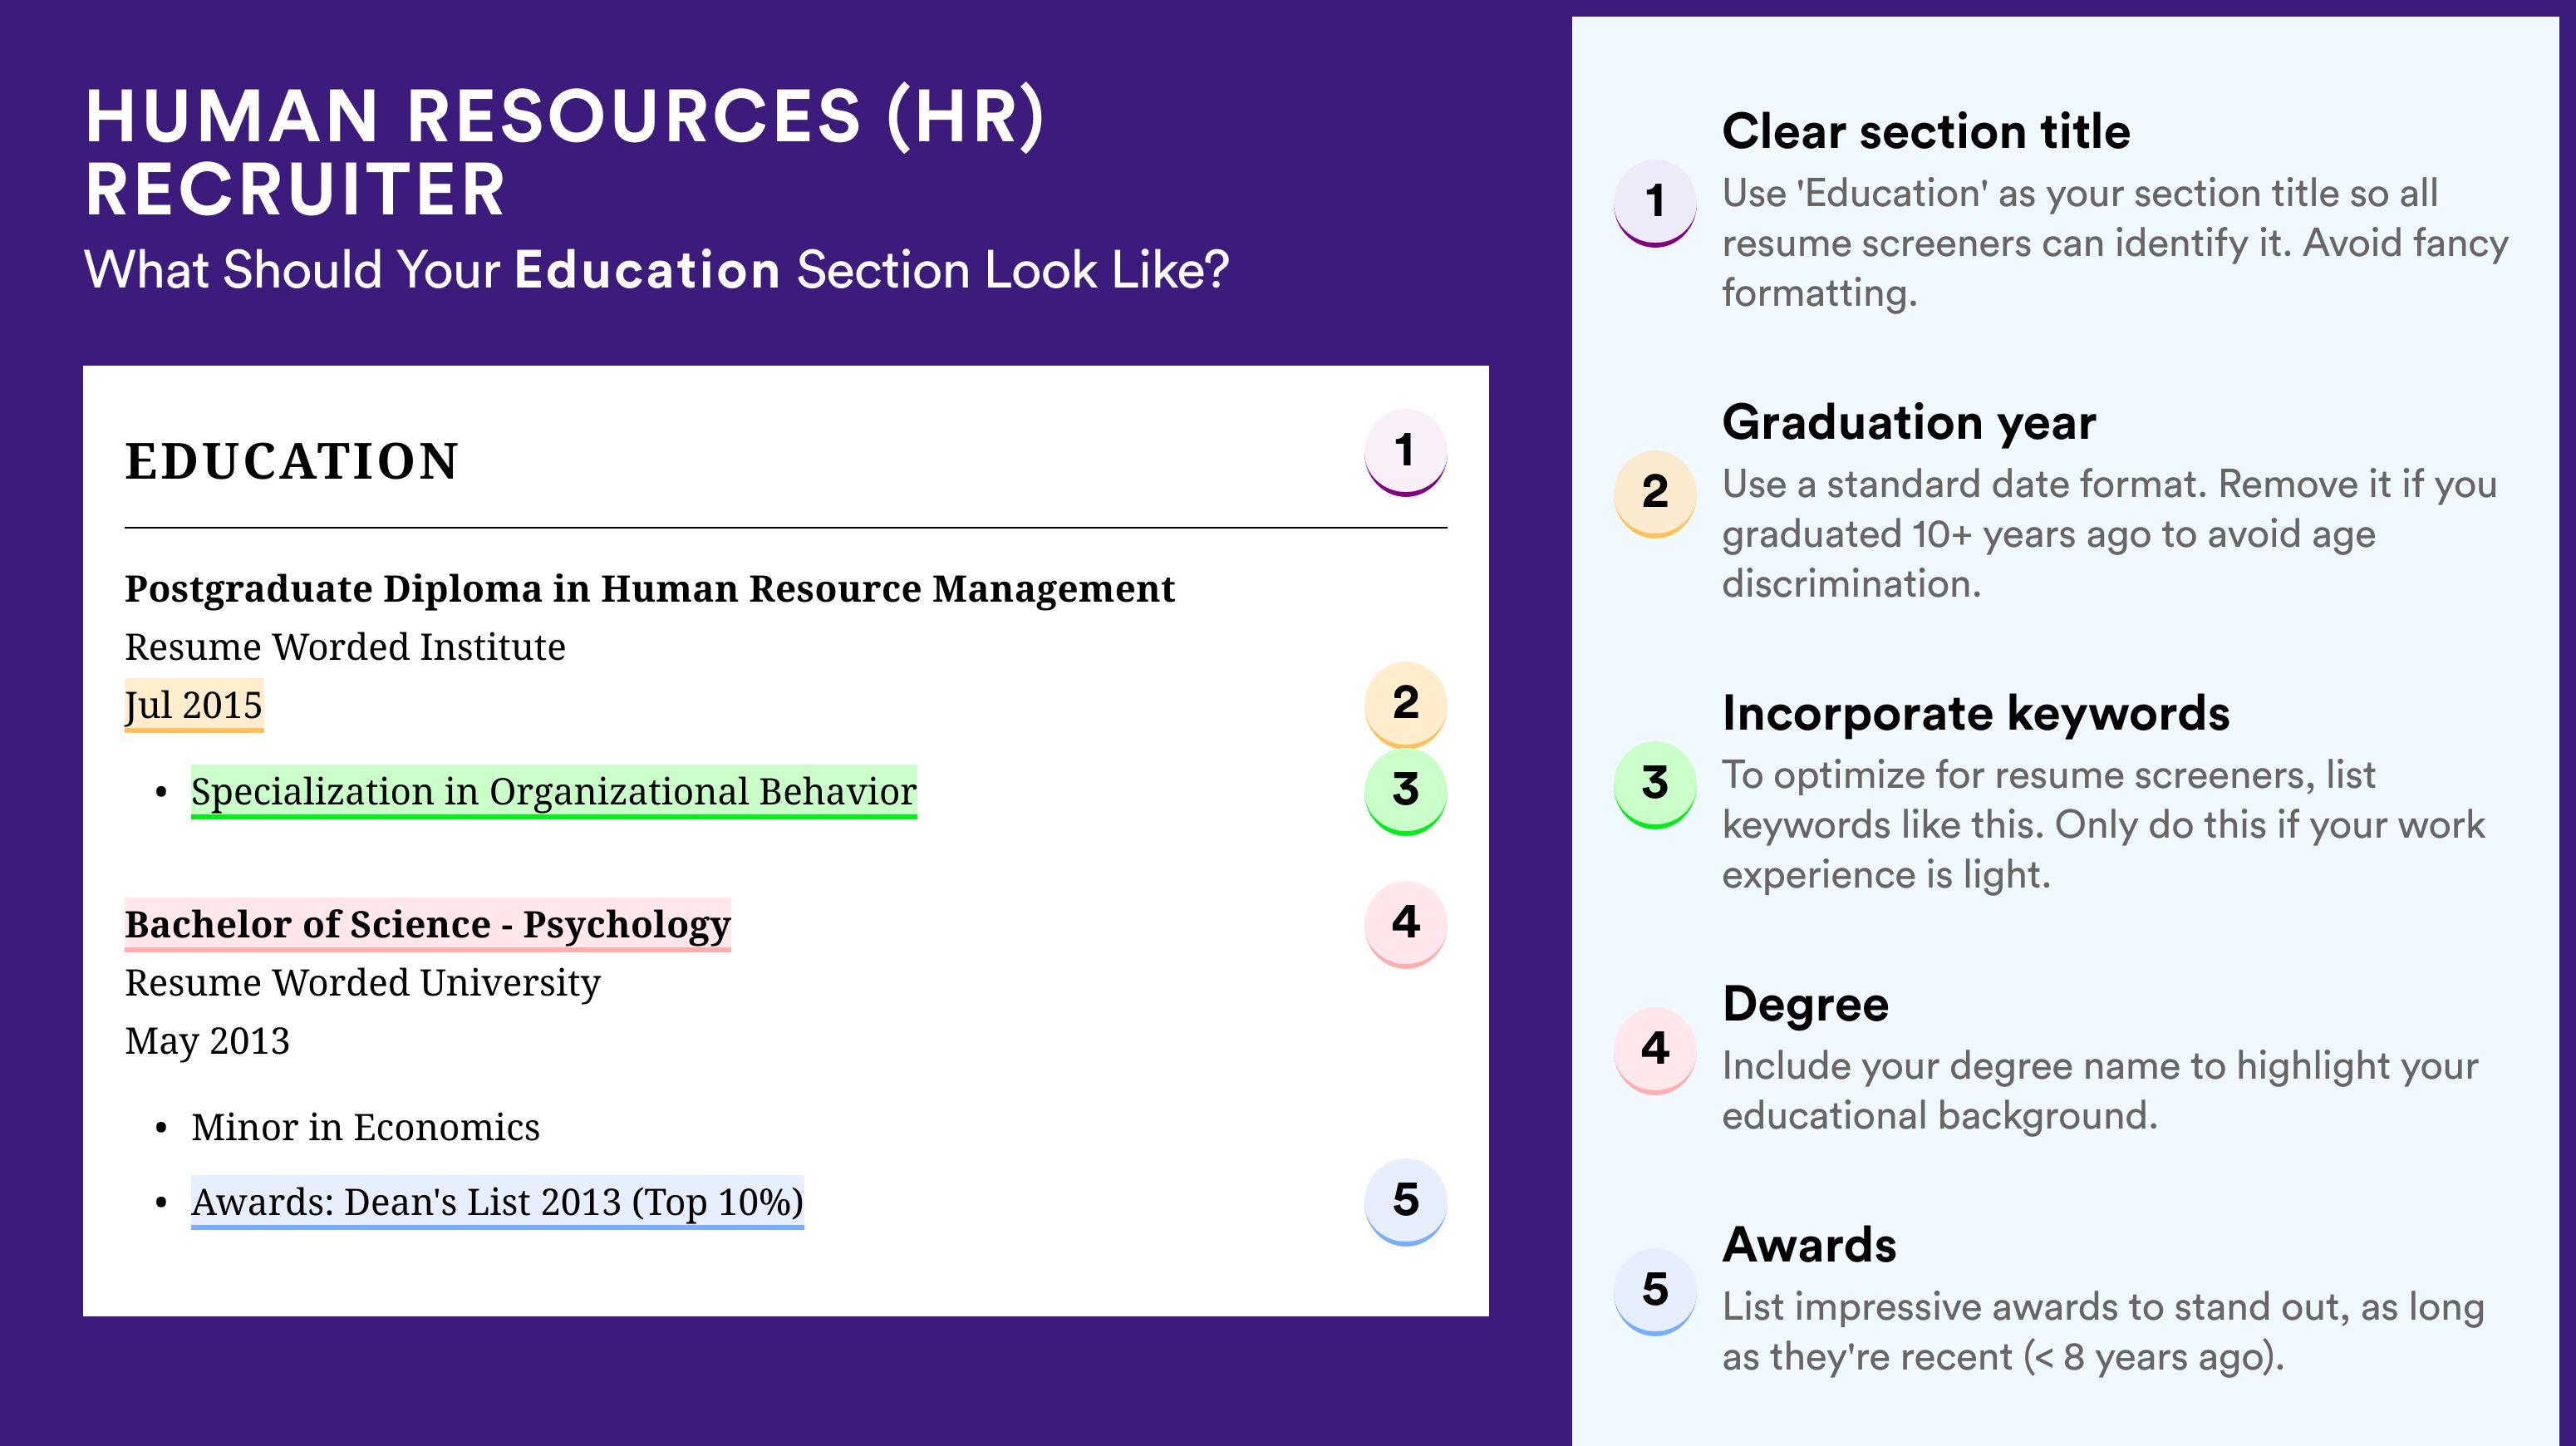 How To Write An Education Section - Human Resources (HR) Recruiter Roles